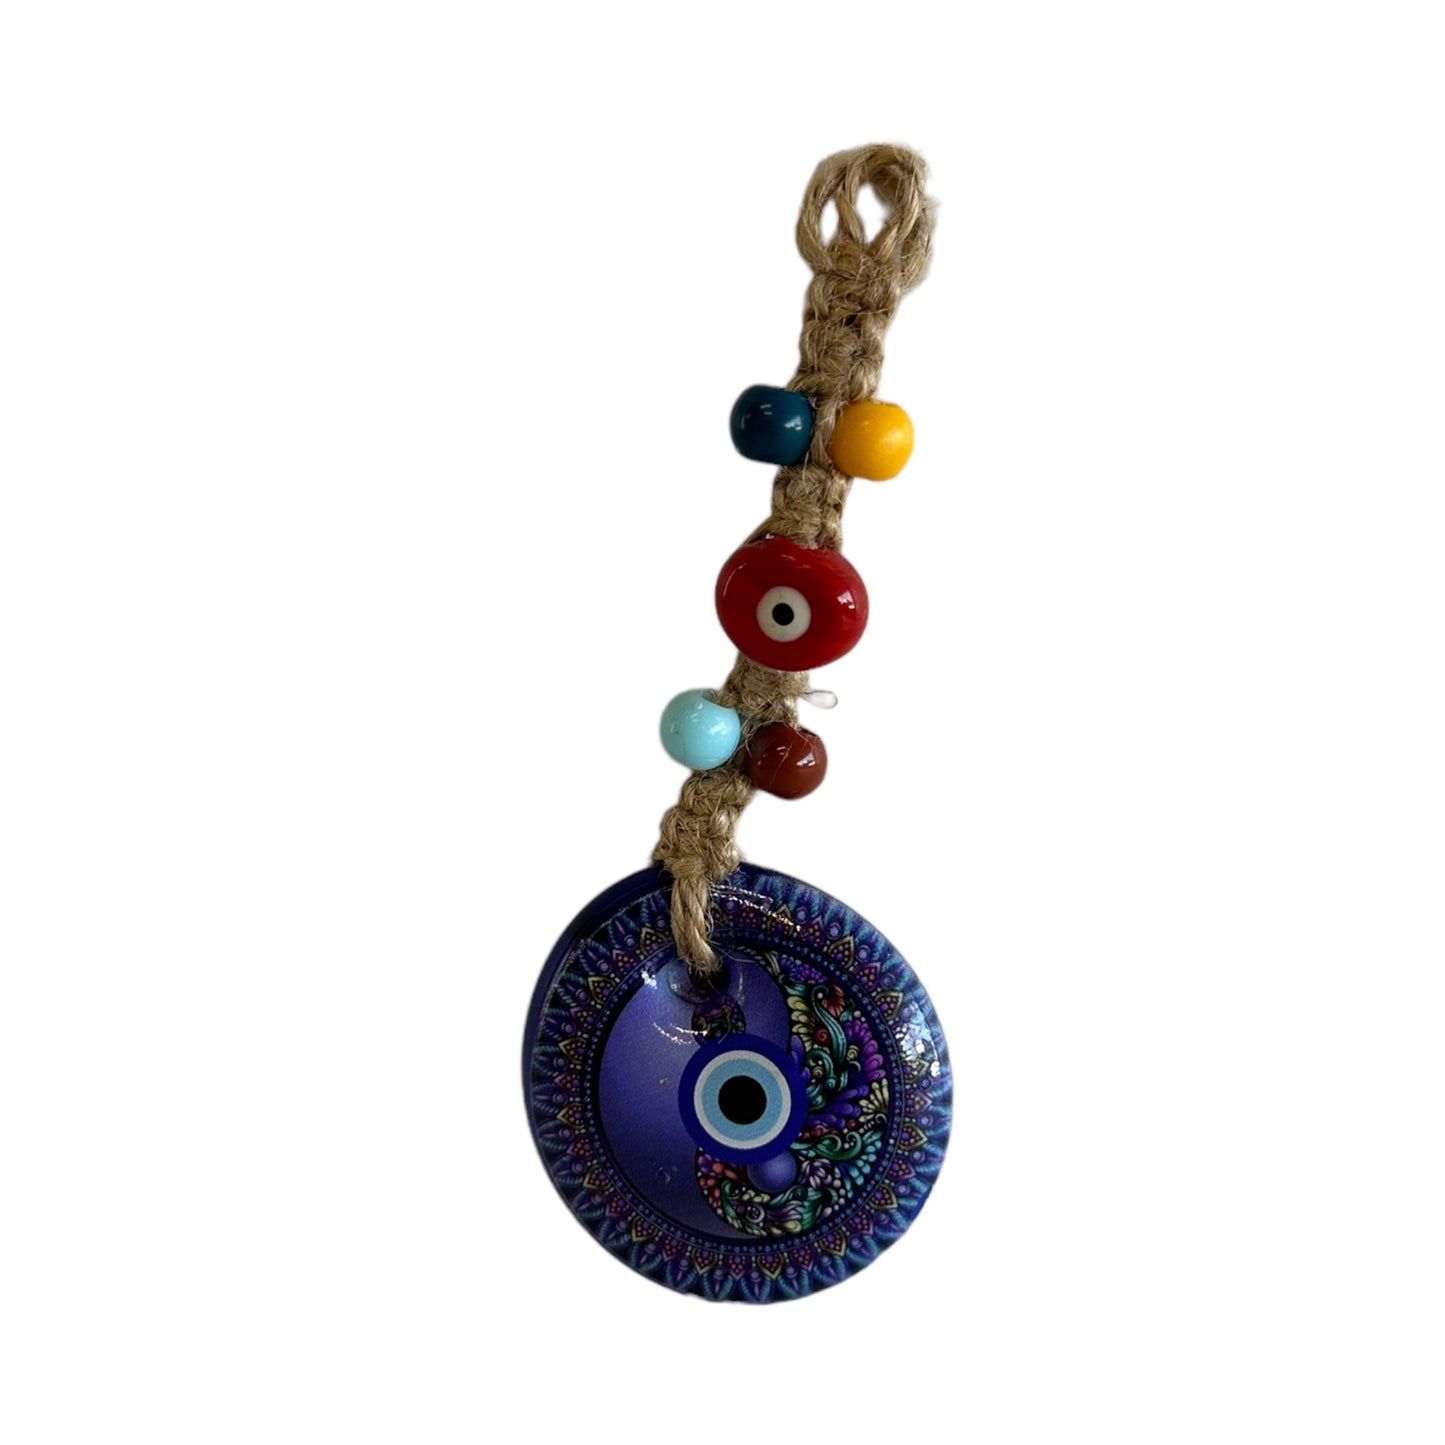 Evil Eye Glass Wall Hanging Decoration 2" inches